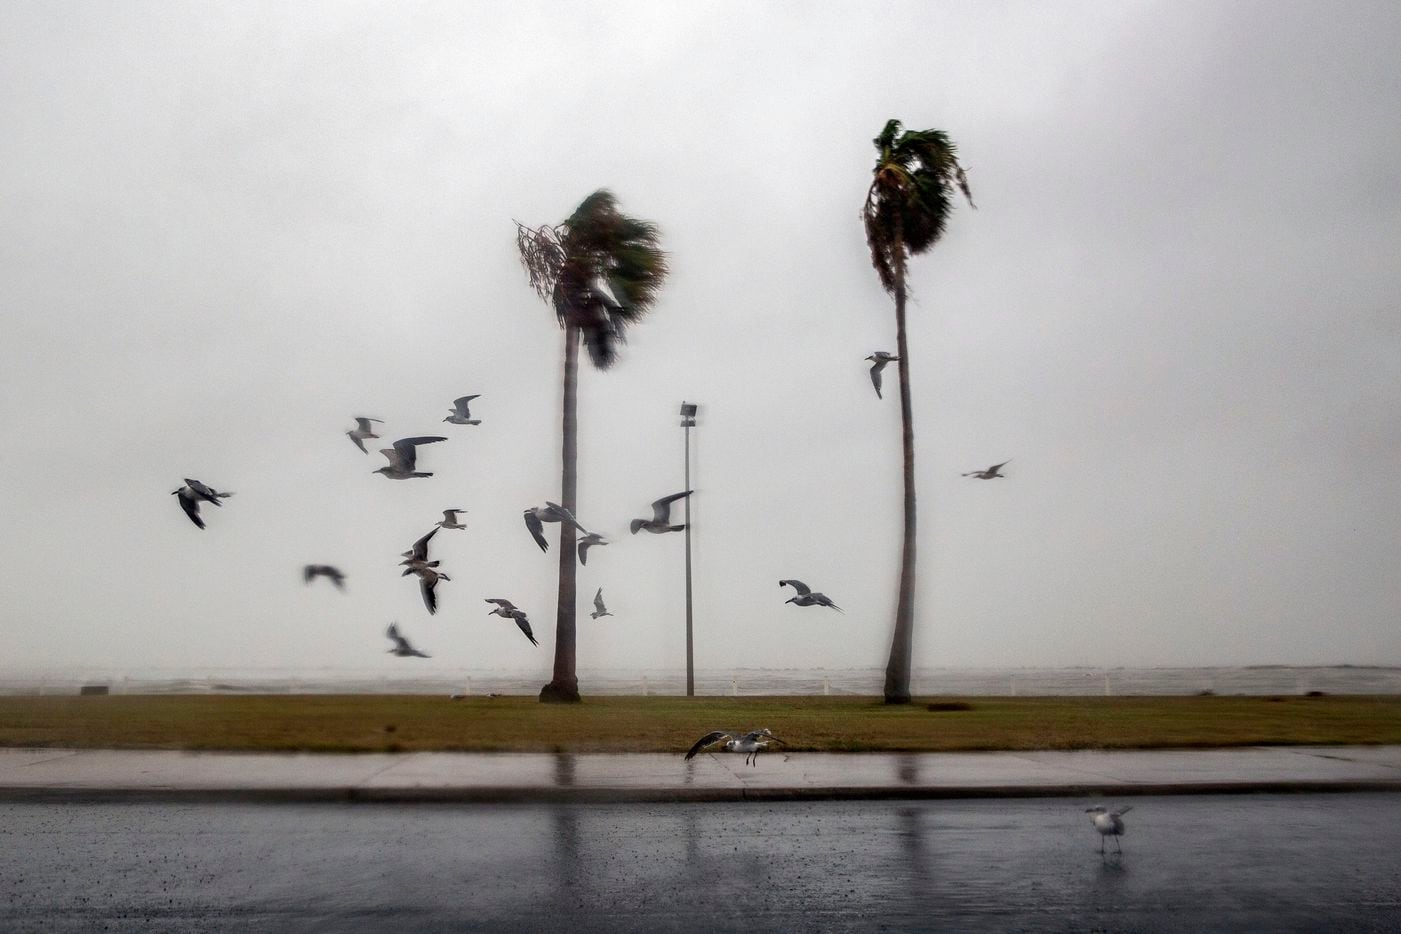 Birds take flight as heavy rains and winds battered the shoreline in Corpus Christi, Texas,...